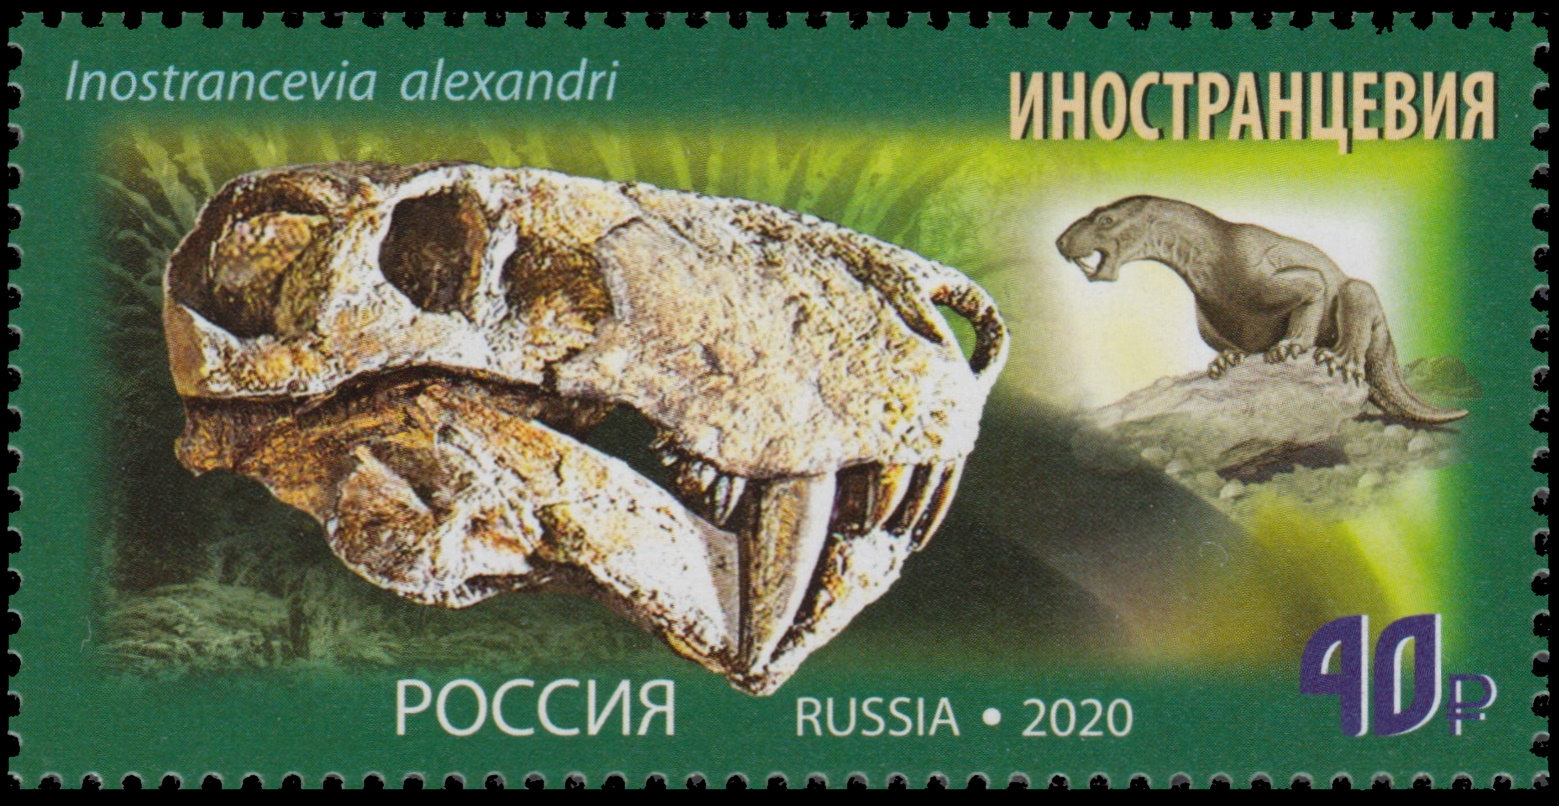 Inostrancevia  on stamp of Russia